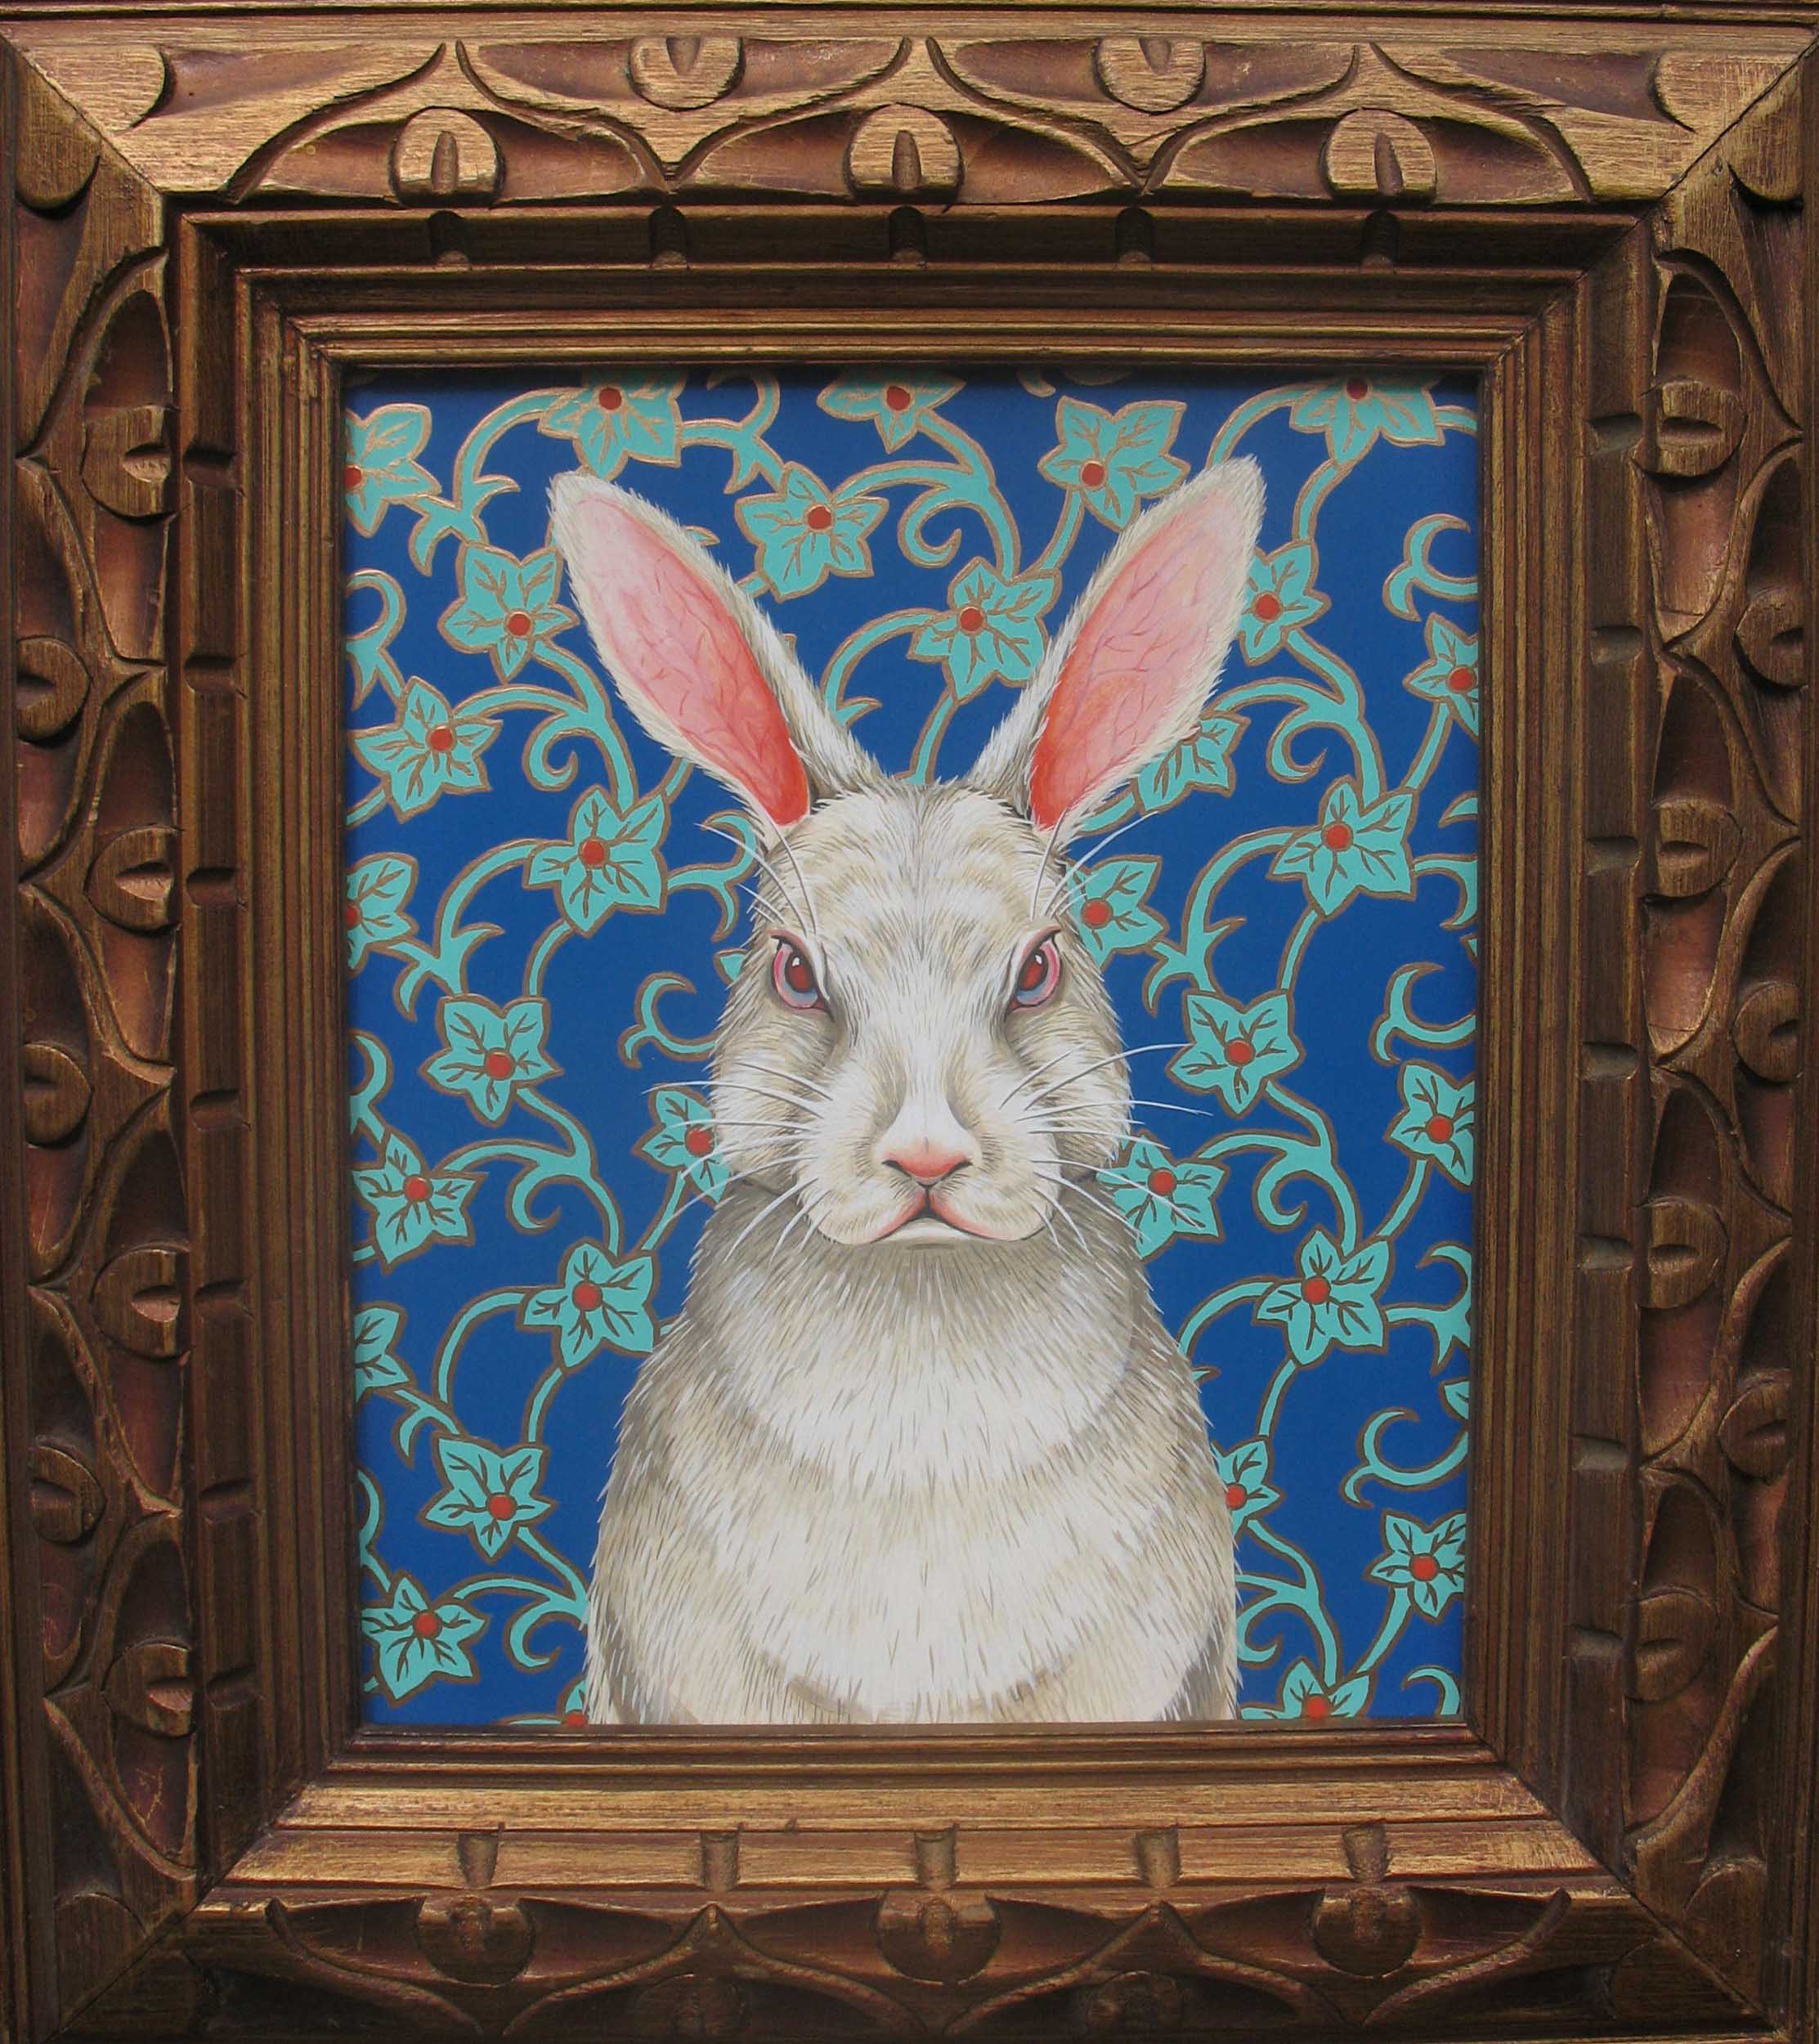   White Rabbit 1,  Acrylic on wood  with vintage frame, 20 x 18 inches (framed)  (private collection) 